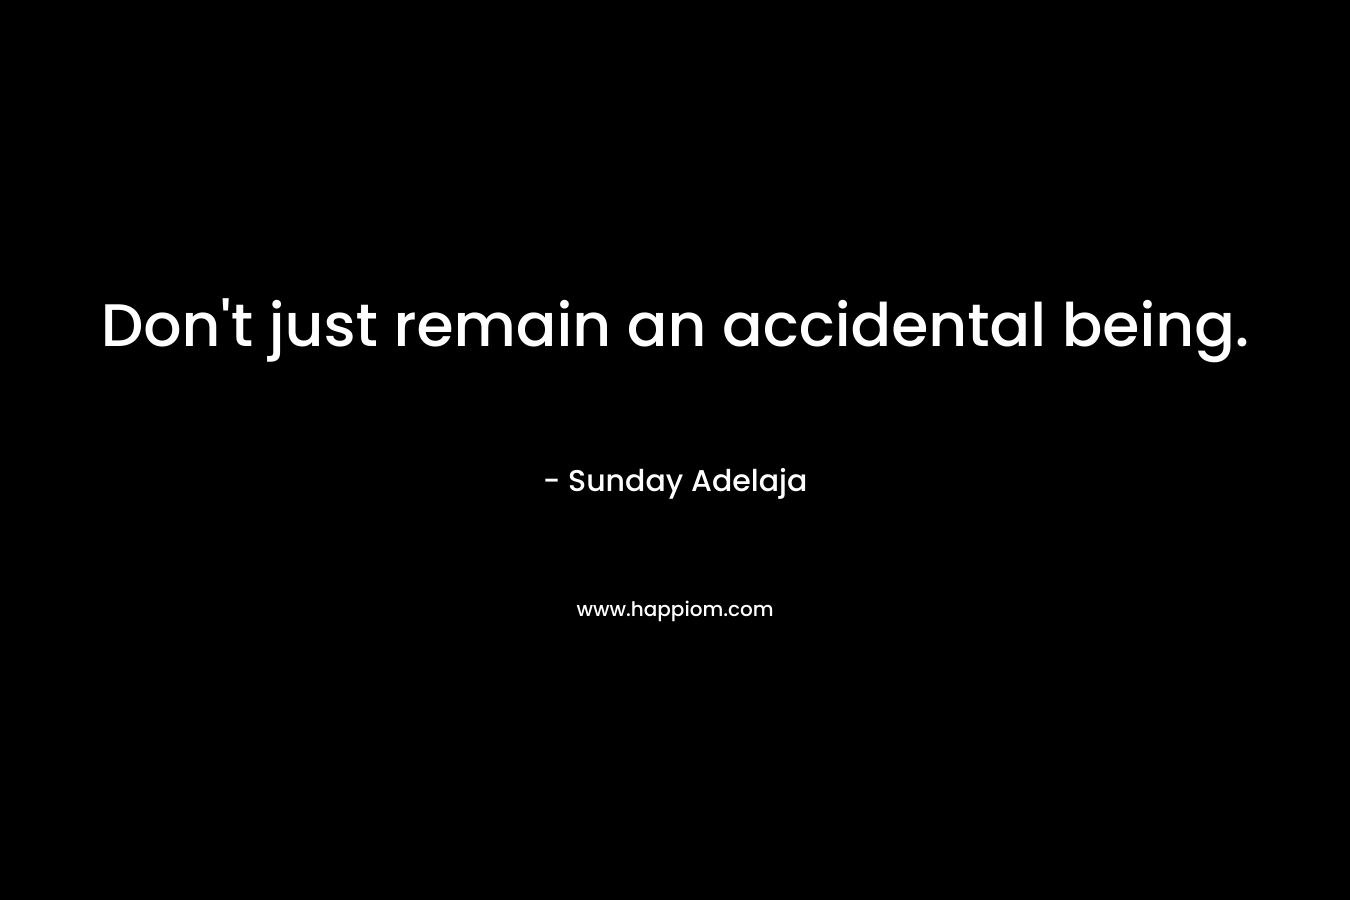 Don't just remain an accidental being.